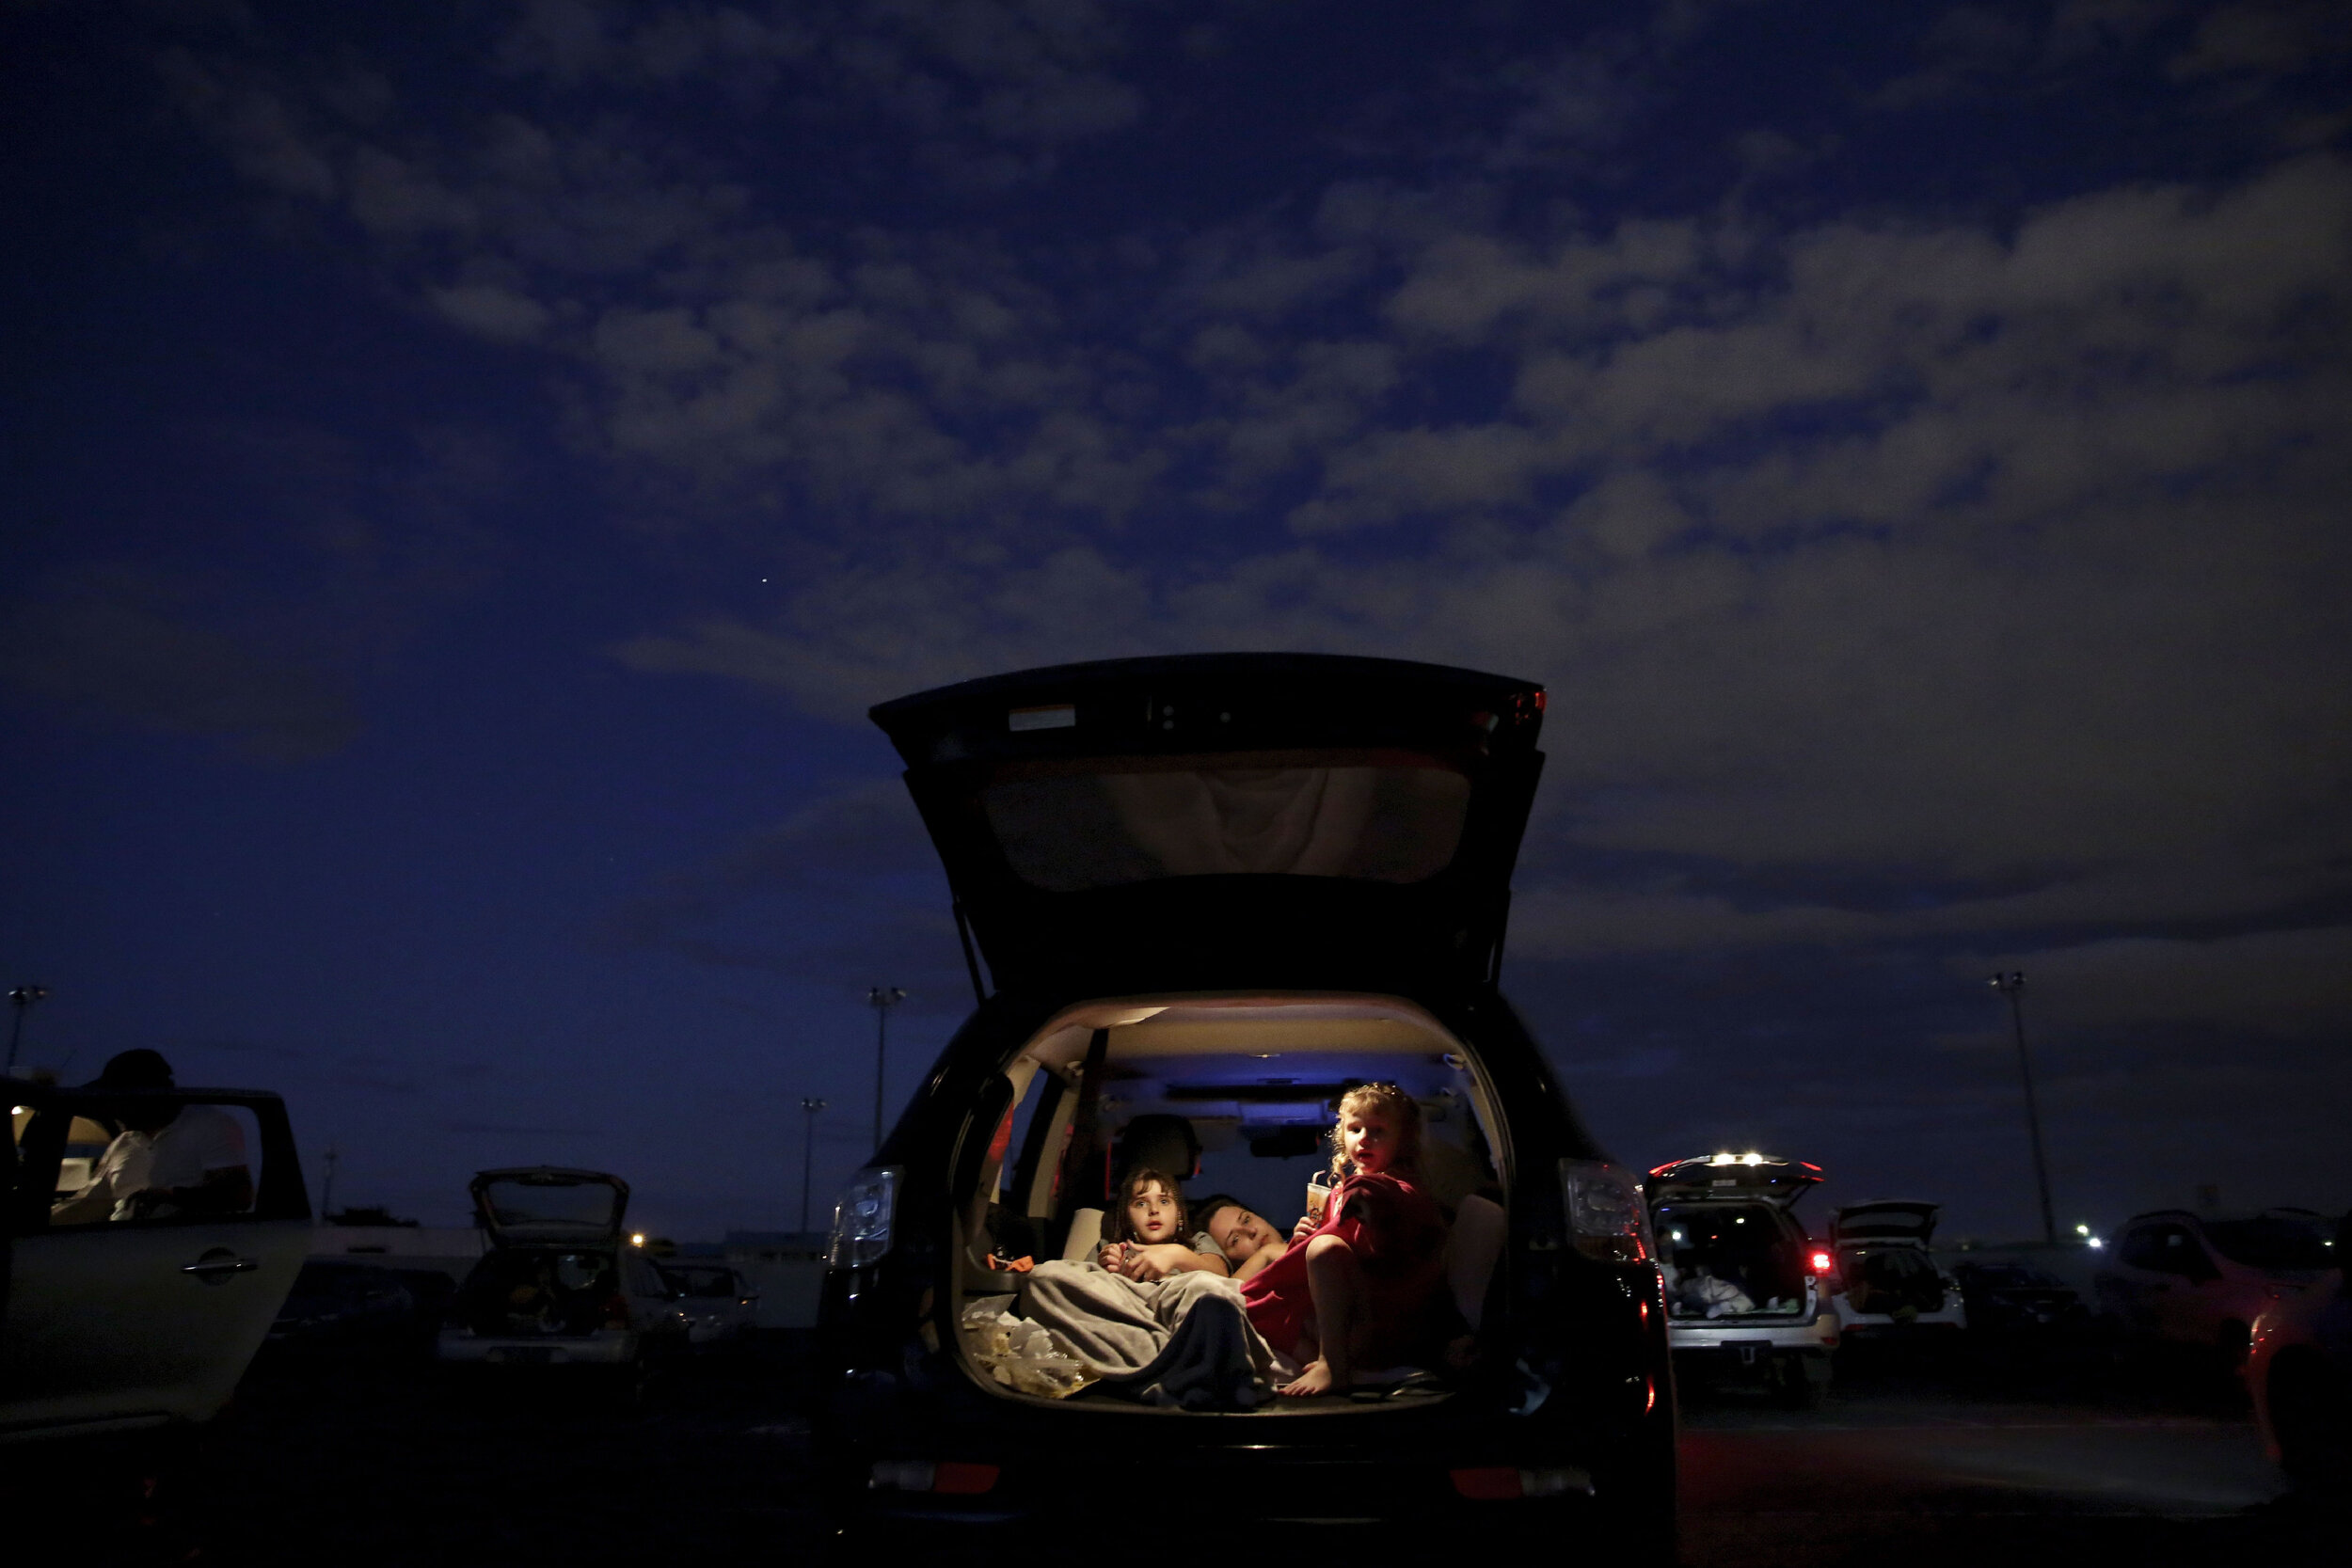  A family watches a movie from the back of their car at a drive-in where motorists must leave one space empty between them amid the new coronavirus pandemic in Brasilia, Brazil, Saturday, May 23, 2020. (AP Photo/Eraldo Peres) 